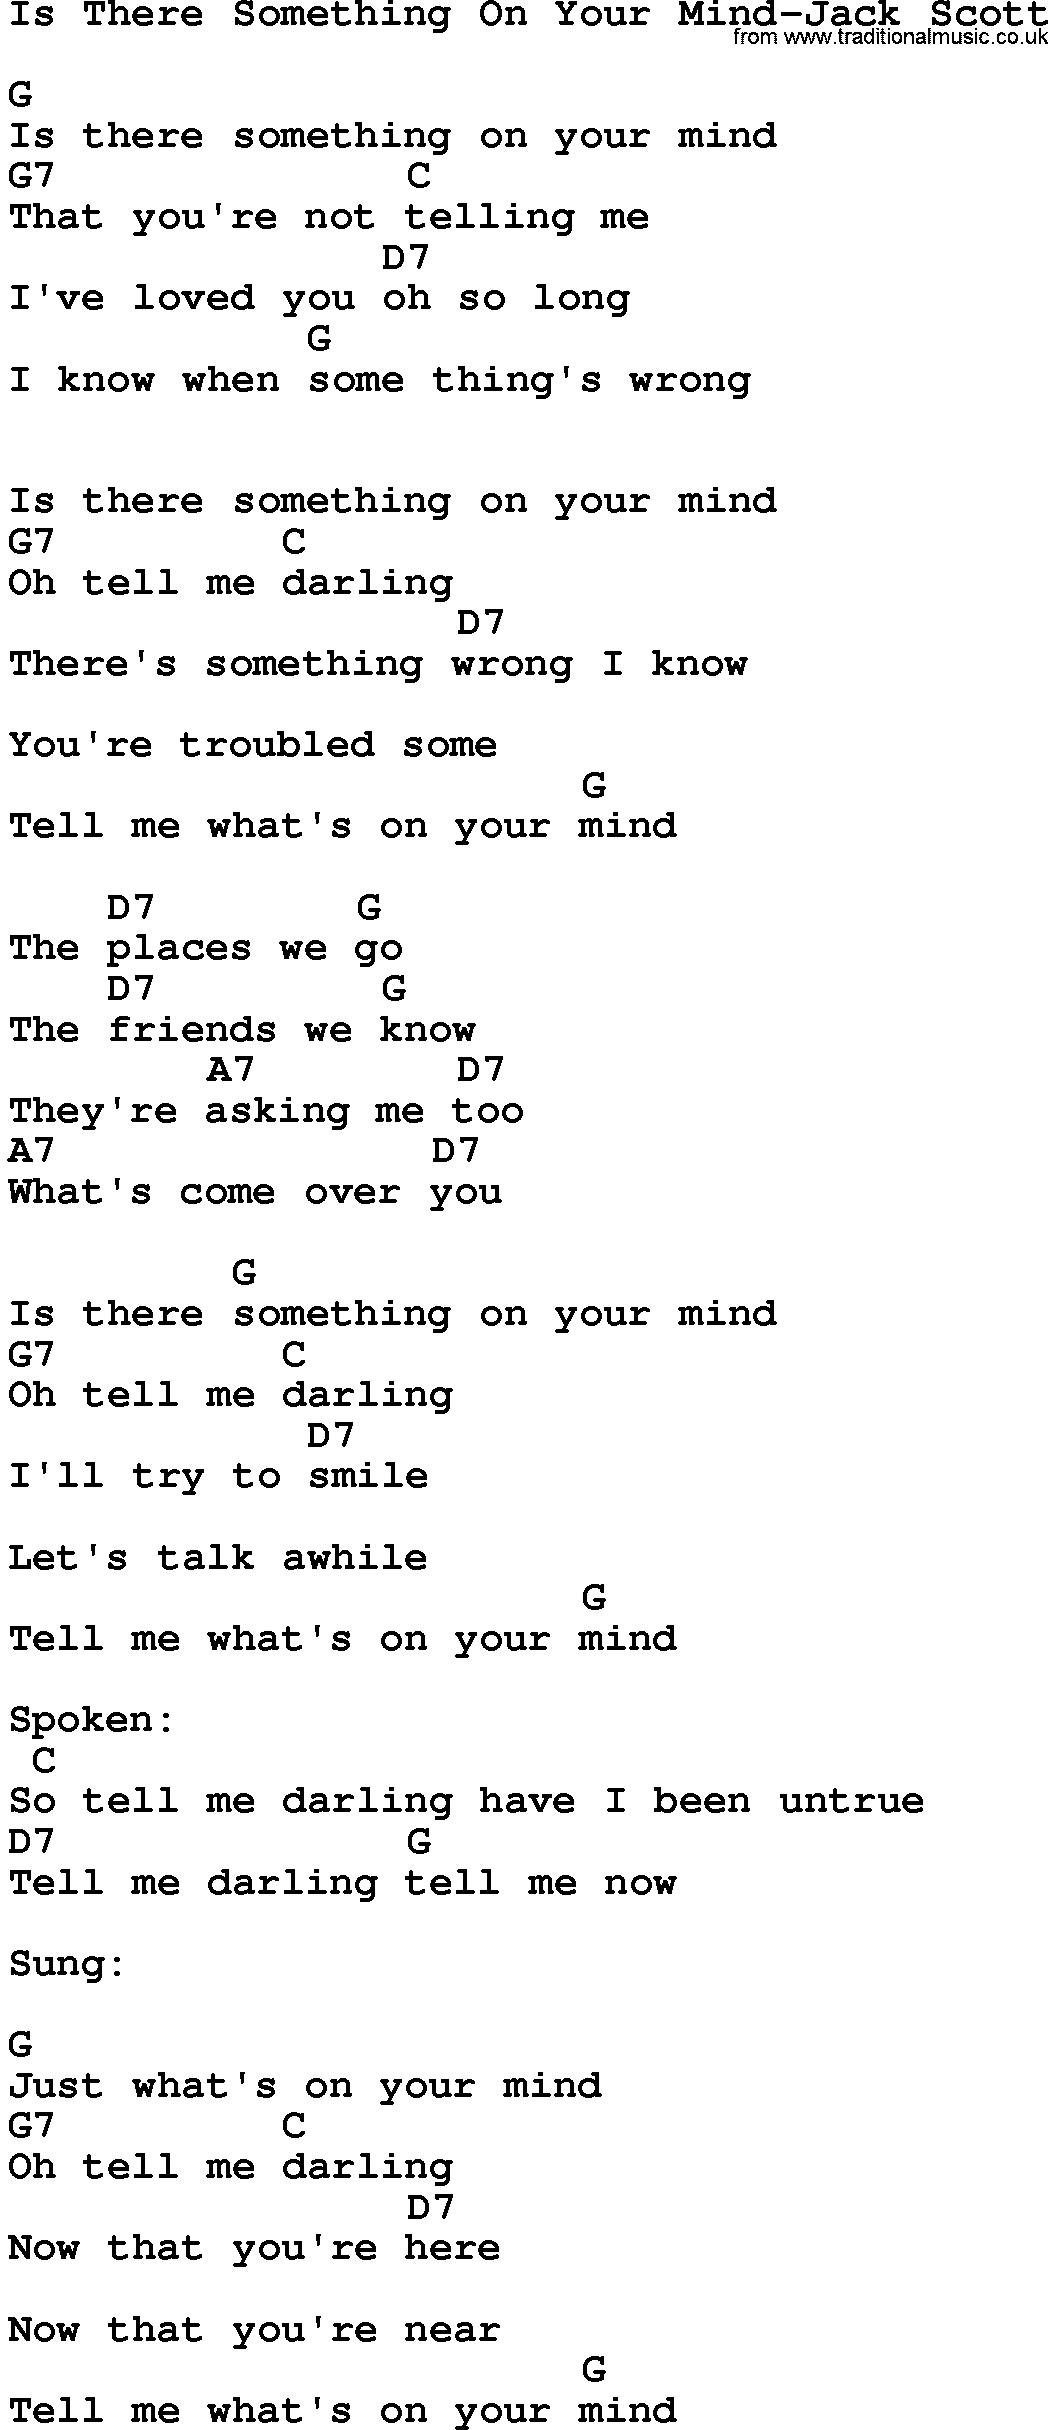 Country music song: Is There Something On Your Mind-Jack Scott lyrics and chords